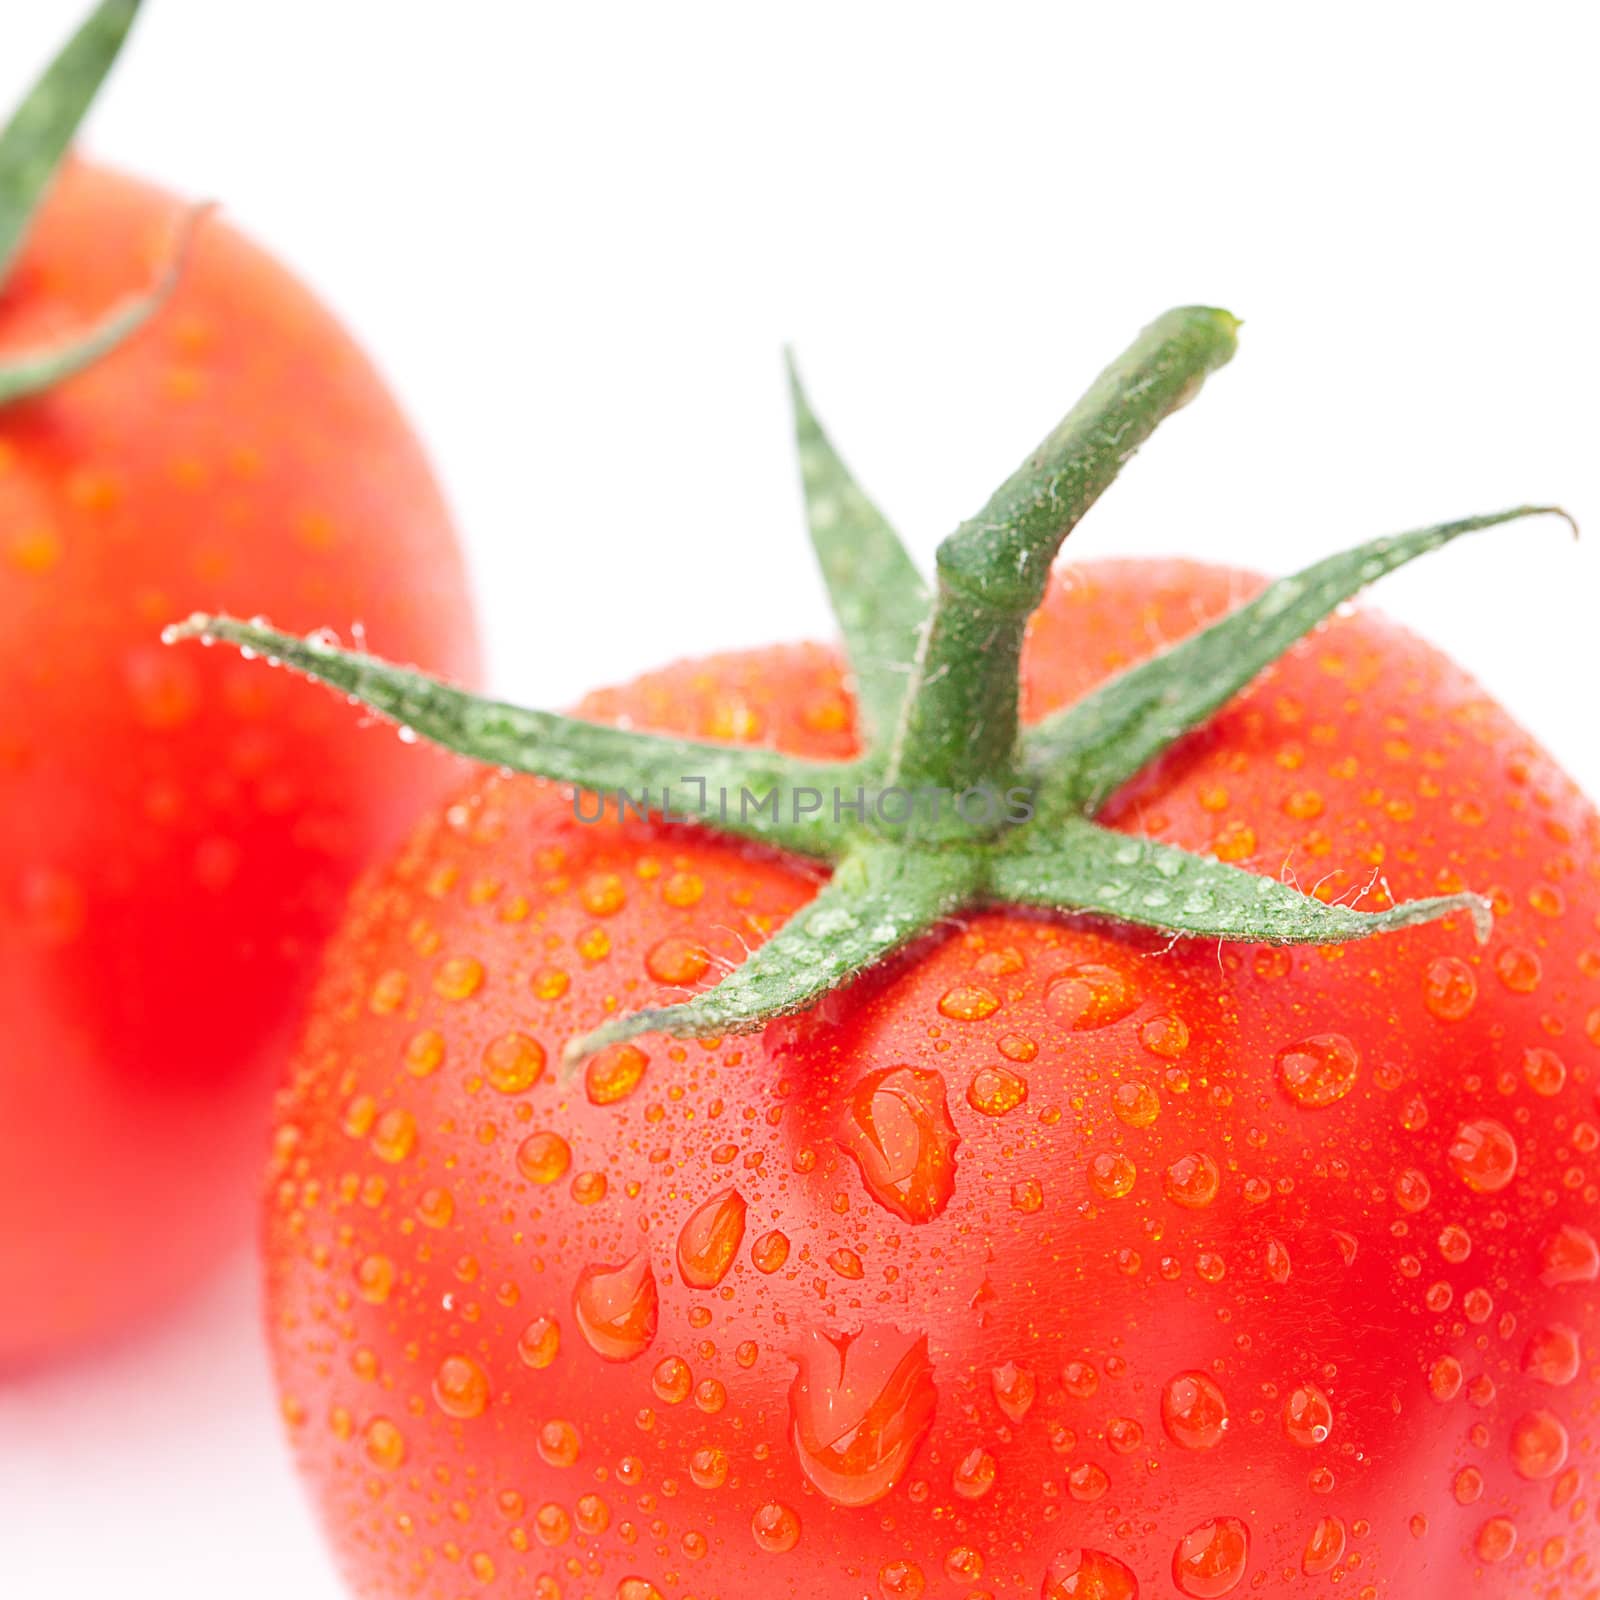 background of the tomato with water drops by jannyjus